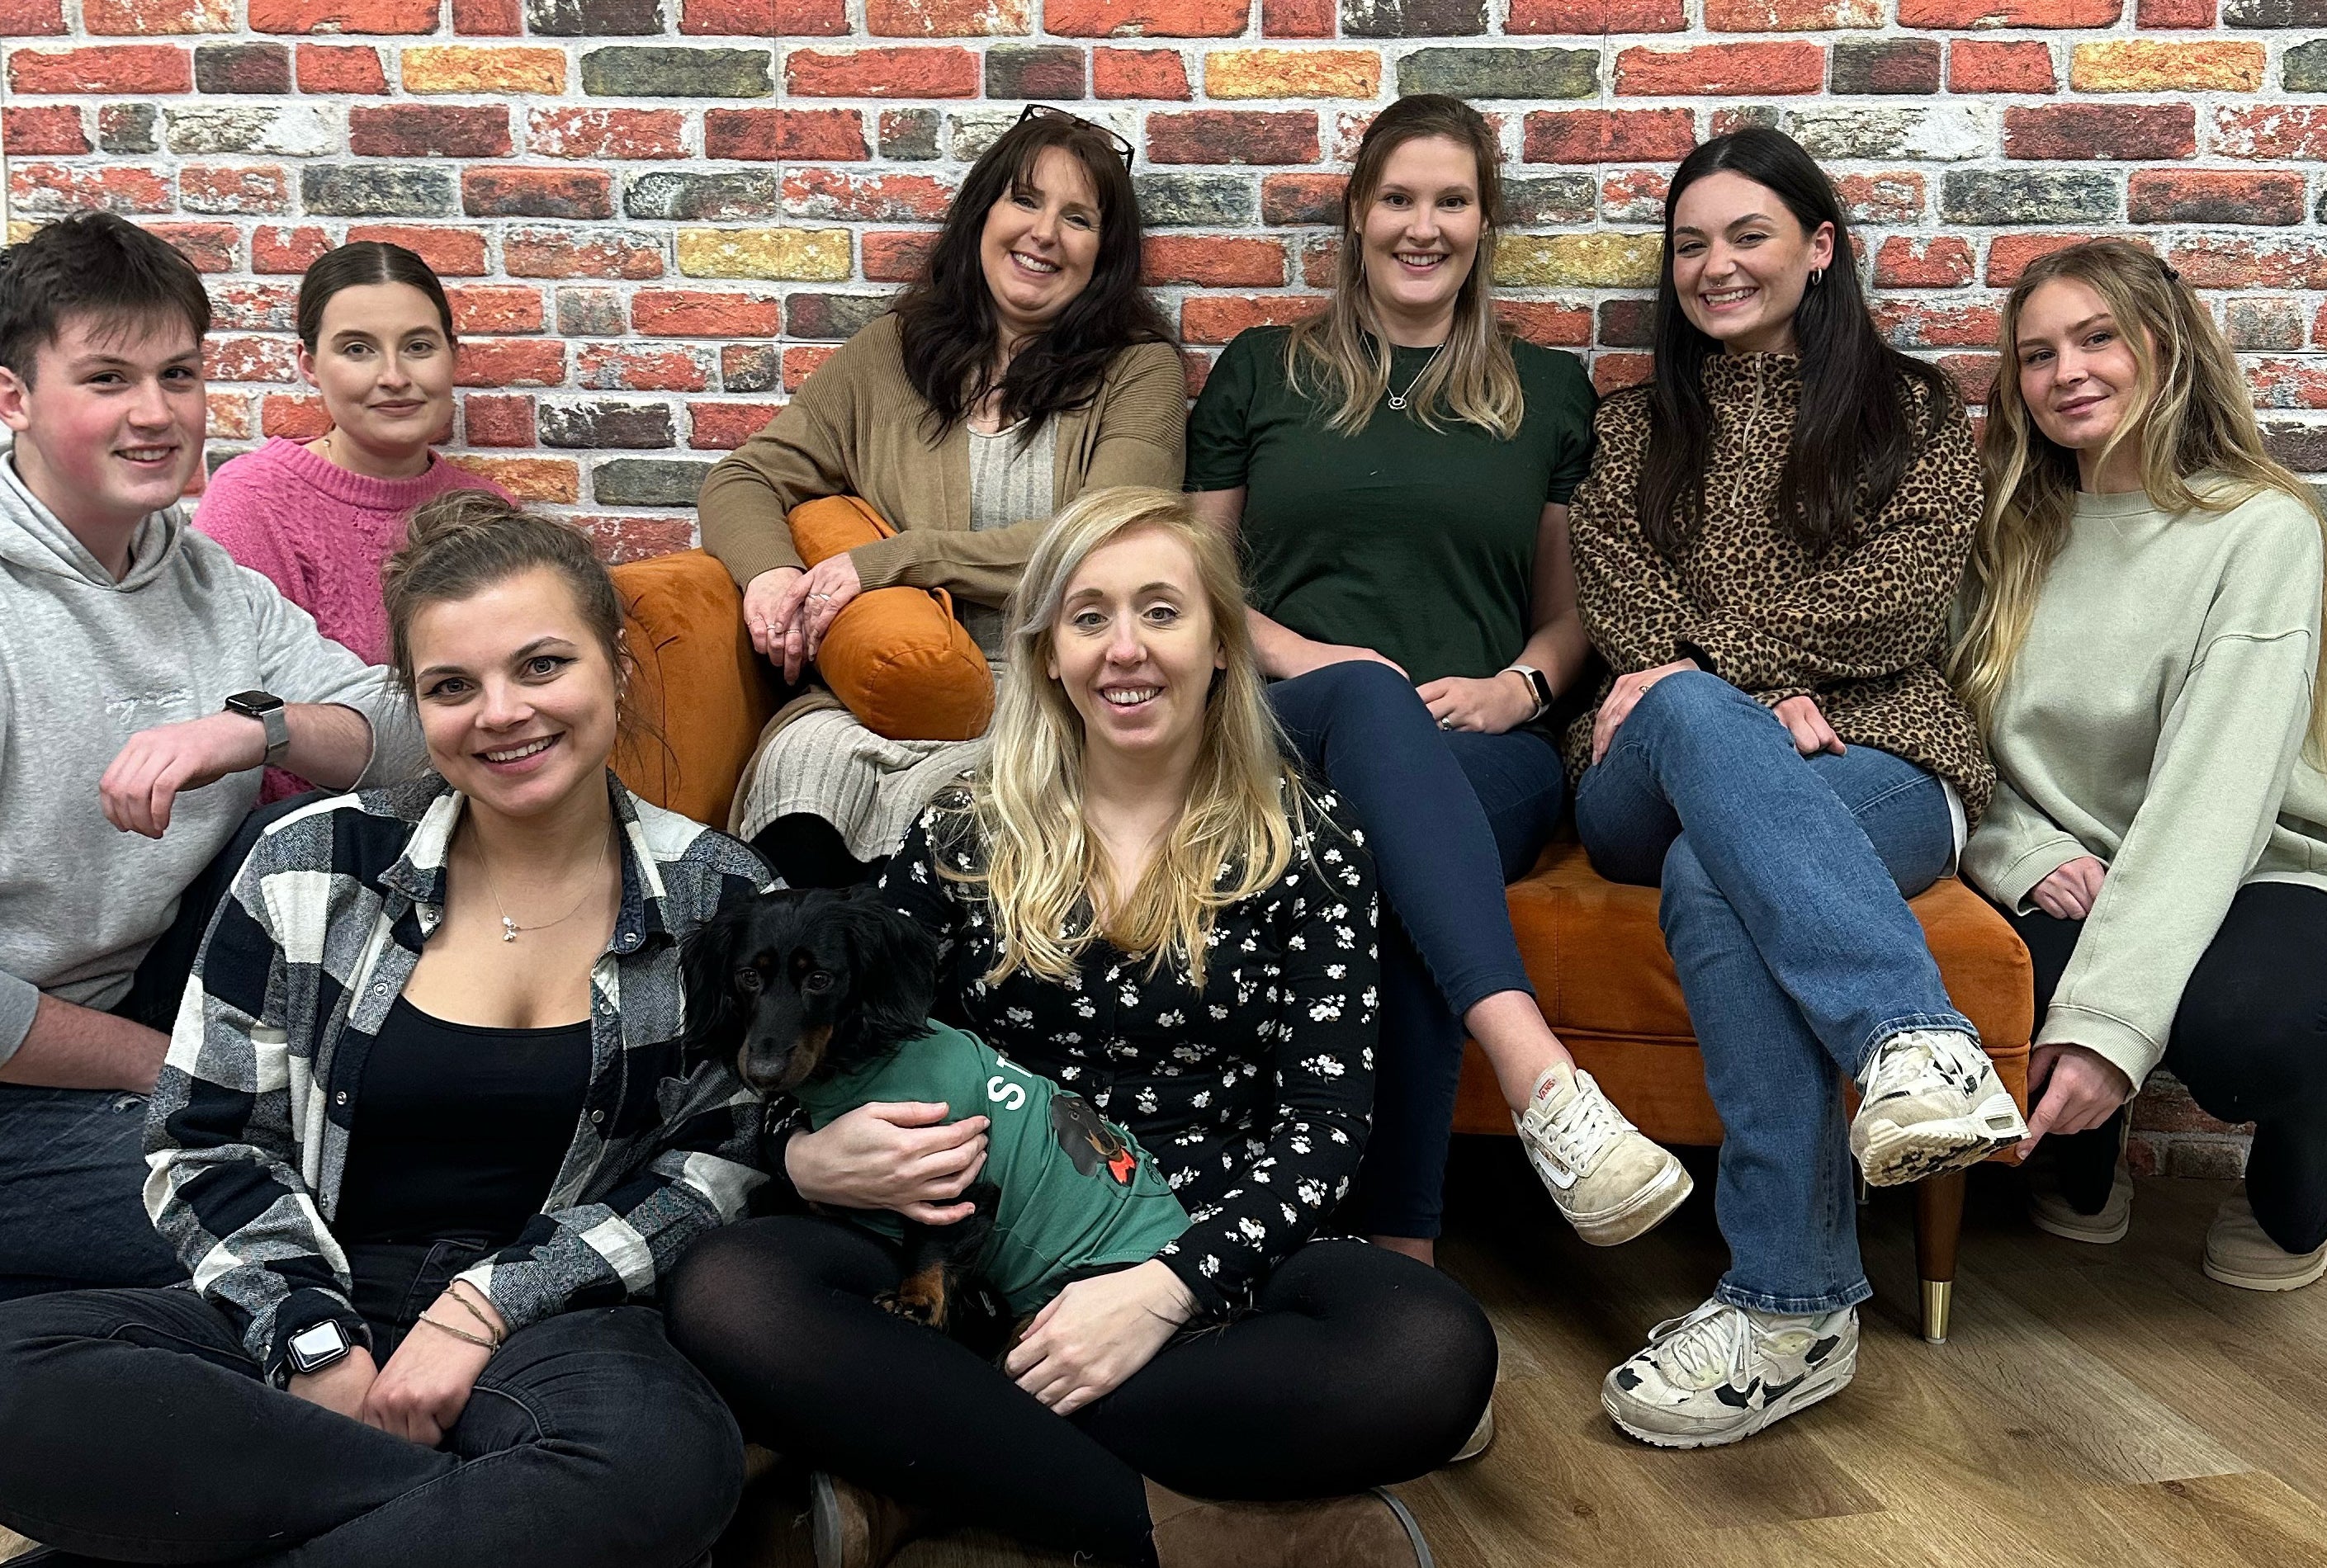 The Hugo and Ted team, from left to right: Jake, Hollie, Hannah, Trudy, Charlotte, Helen, Sophia and Ruby.